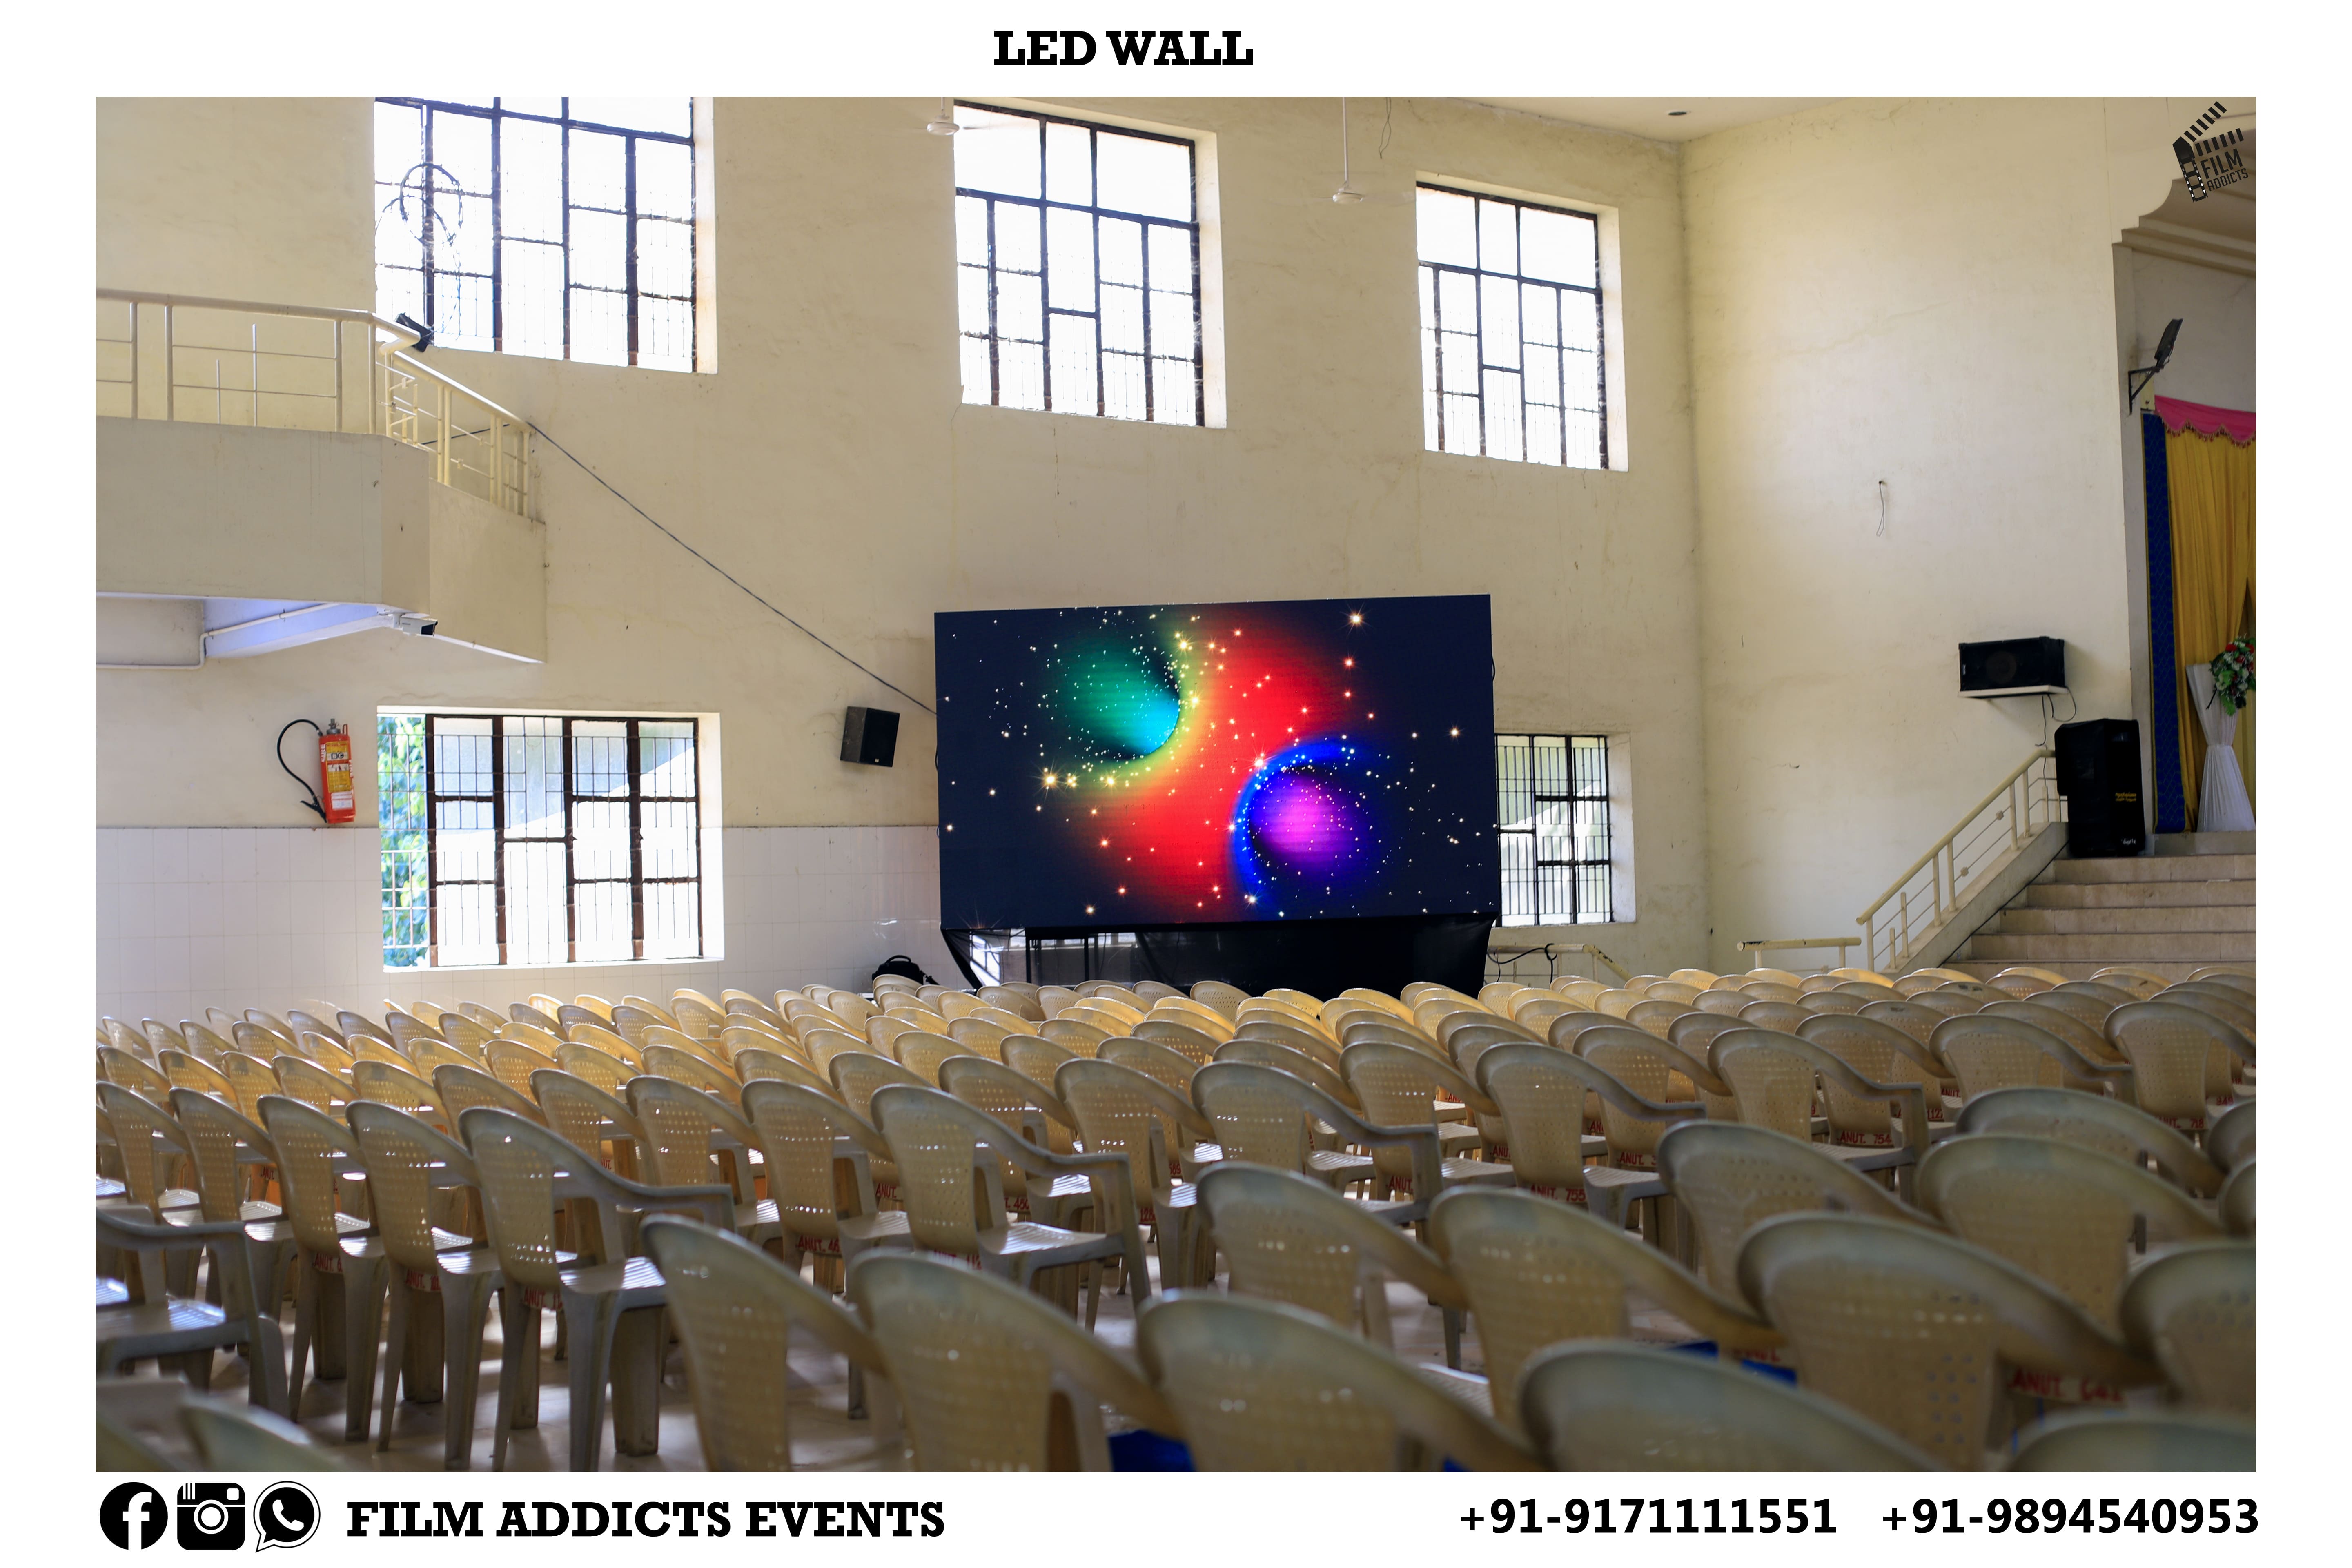 Best LED Video Wall Rental Services in Sivagangai, Best LED Wall Services In Sivagangai ,Best LED Wall Rental Services In Sivagangai, Best Budget LED Wall Rental  Services in Sivagangai, Best Wedding LED Wall Rentals In Sivagangai, Best clarity in led wall rentals in Sivagangai, Best cost-effective display rentals in Sivagangai, Best crisp, bright, high resolution led video services in Sivagangai, Best led wall rental services in Sivagangai, Best tailored lighting, vision and sound solutions led rentals in Sivagangai, Best outstanding new LED panels rental Service in Sivagangai, Best Indoor and Outdoor LED panels rental Service in Sivagangai, Best high resolution LED display rental Service in Sivagangai, Best Wedding LED wall rentals in Sivagangai, Best Grand wedding LED wall rentals in Sivagangai, Best LED wall rental Service in Sivagangai, Best LED Video Services in Sivagangai, Best Grand Wedding LED wall Renatls in Sivagangai, Best LED wall Rentals for Grand Occasions in Sivagangai, Best Wedding LED Video Services in Sivagangai, Best Wedding LED video wall Rental Services in Sivagangai, Best LED Video Wall Rentals for Grand Occassions in Sivagangai, Best LED Video Wall Rentals for events in Sivagangai, Best LED video Services for live events in Sivagangai, Best video wall rentals for Live events in Sivagangai, Best LED Video Wall Rentals for Live events in Sivagangai, Best LED Video Wall On Hire in Sivagangai, Best LED Video Wall Services in Sivagangai, Best LED Video Wall Service Systems in Sivagangai, Best LED Wall Washer Light Services in Sivagangai, Best LED Wall Light Services in Sivagangai, Best LED Wall Mount Bracket Services in Sivagangai.